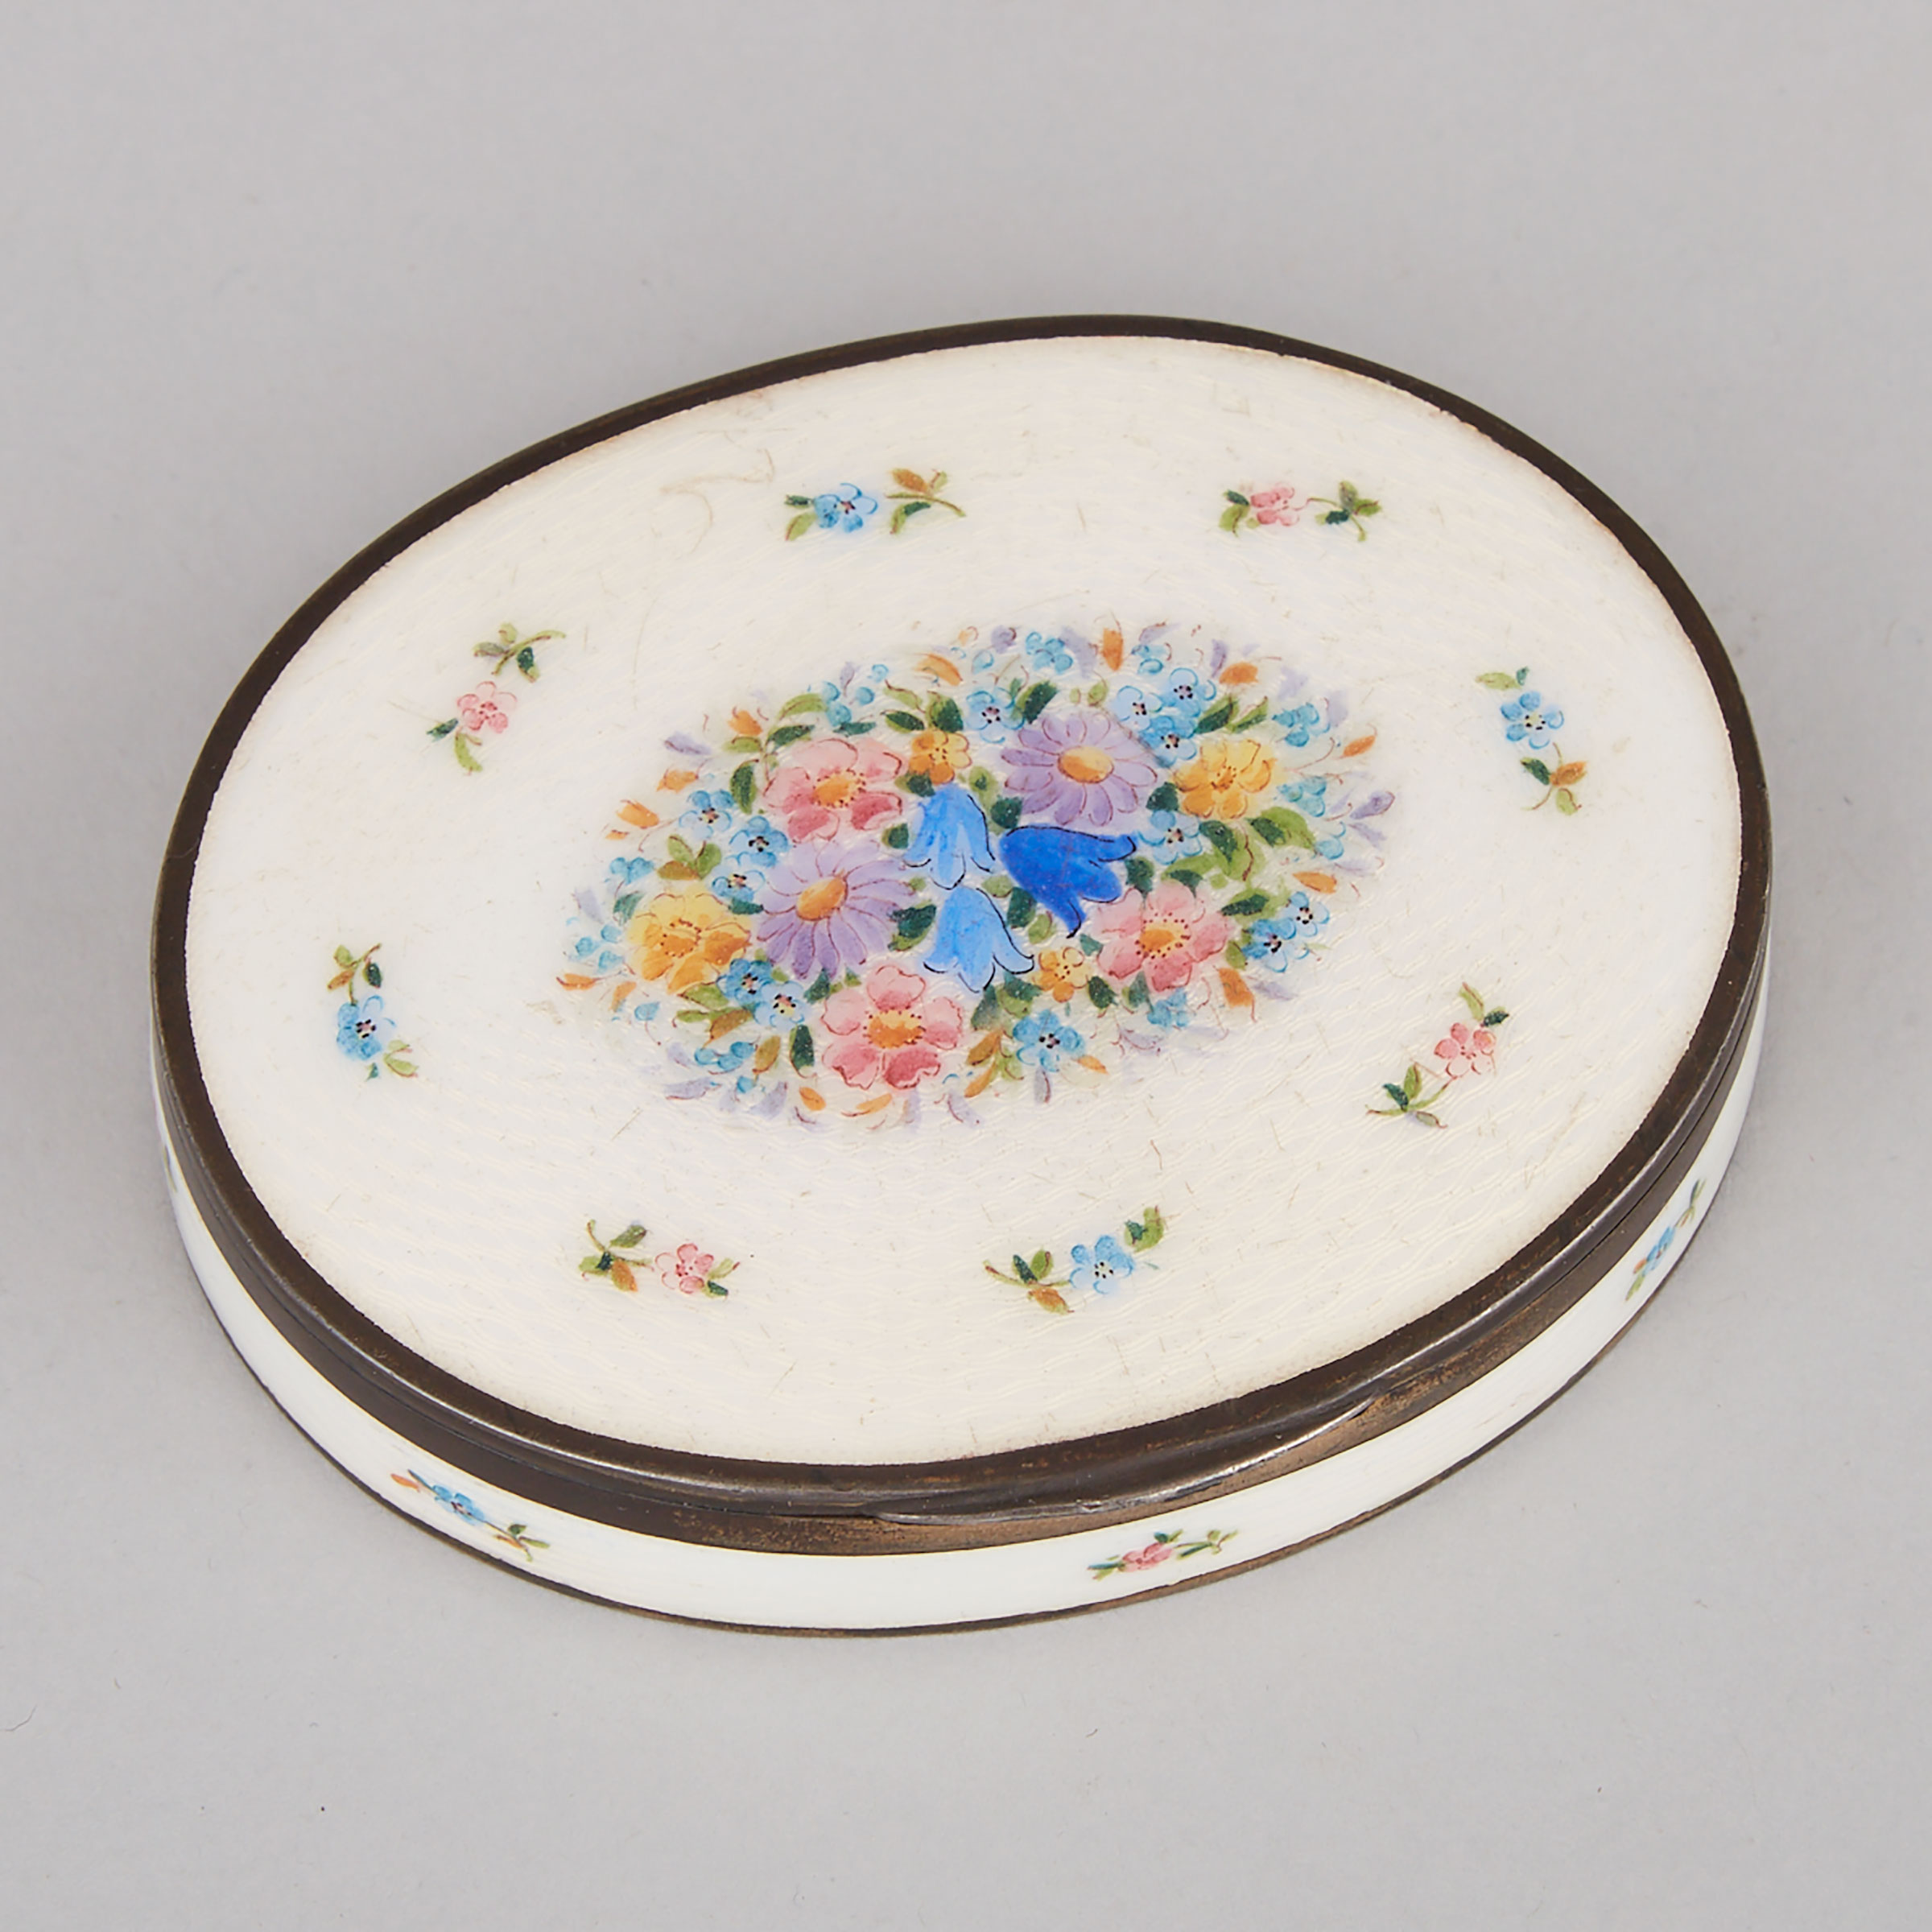 Austro-Hungarian Silver and Enamel Oval Box, Vienna, early 20th century